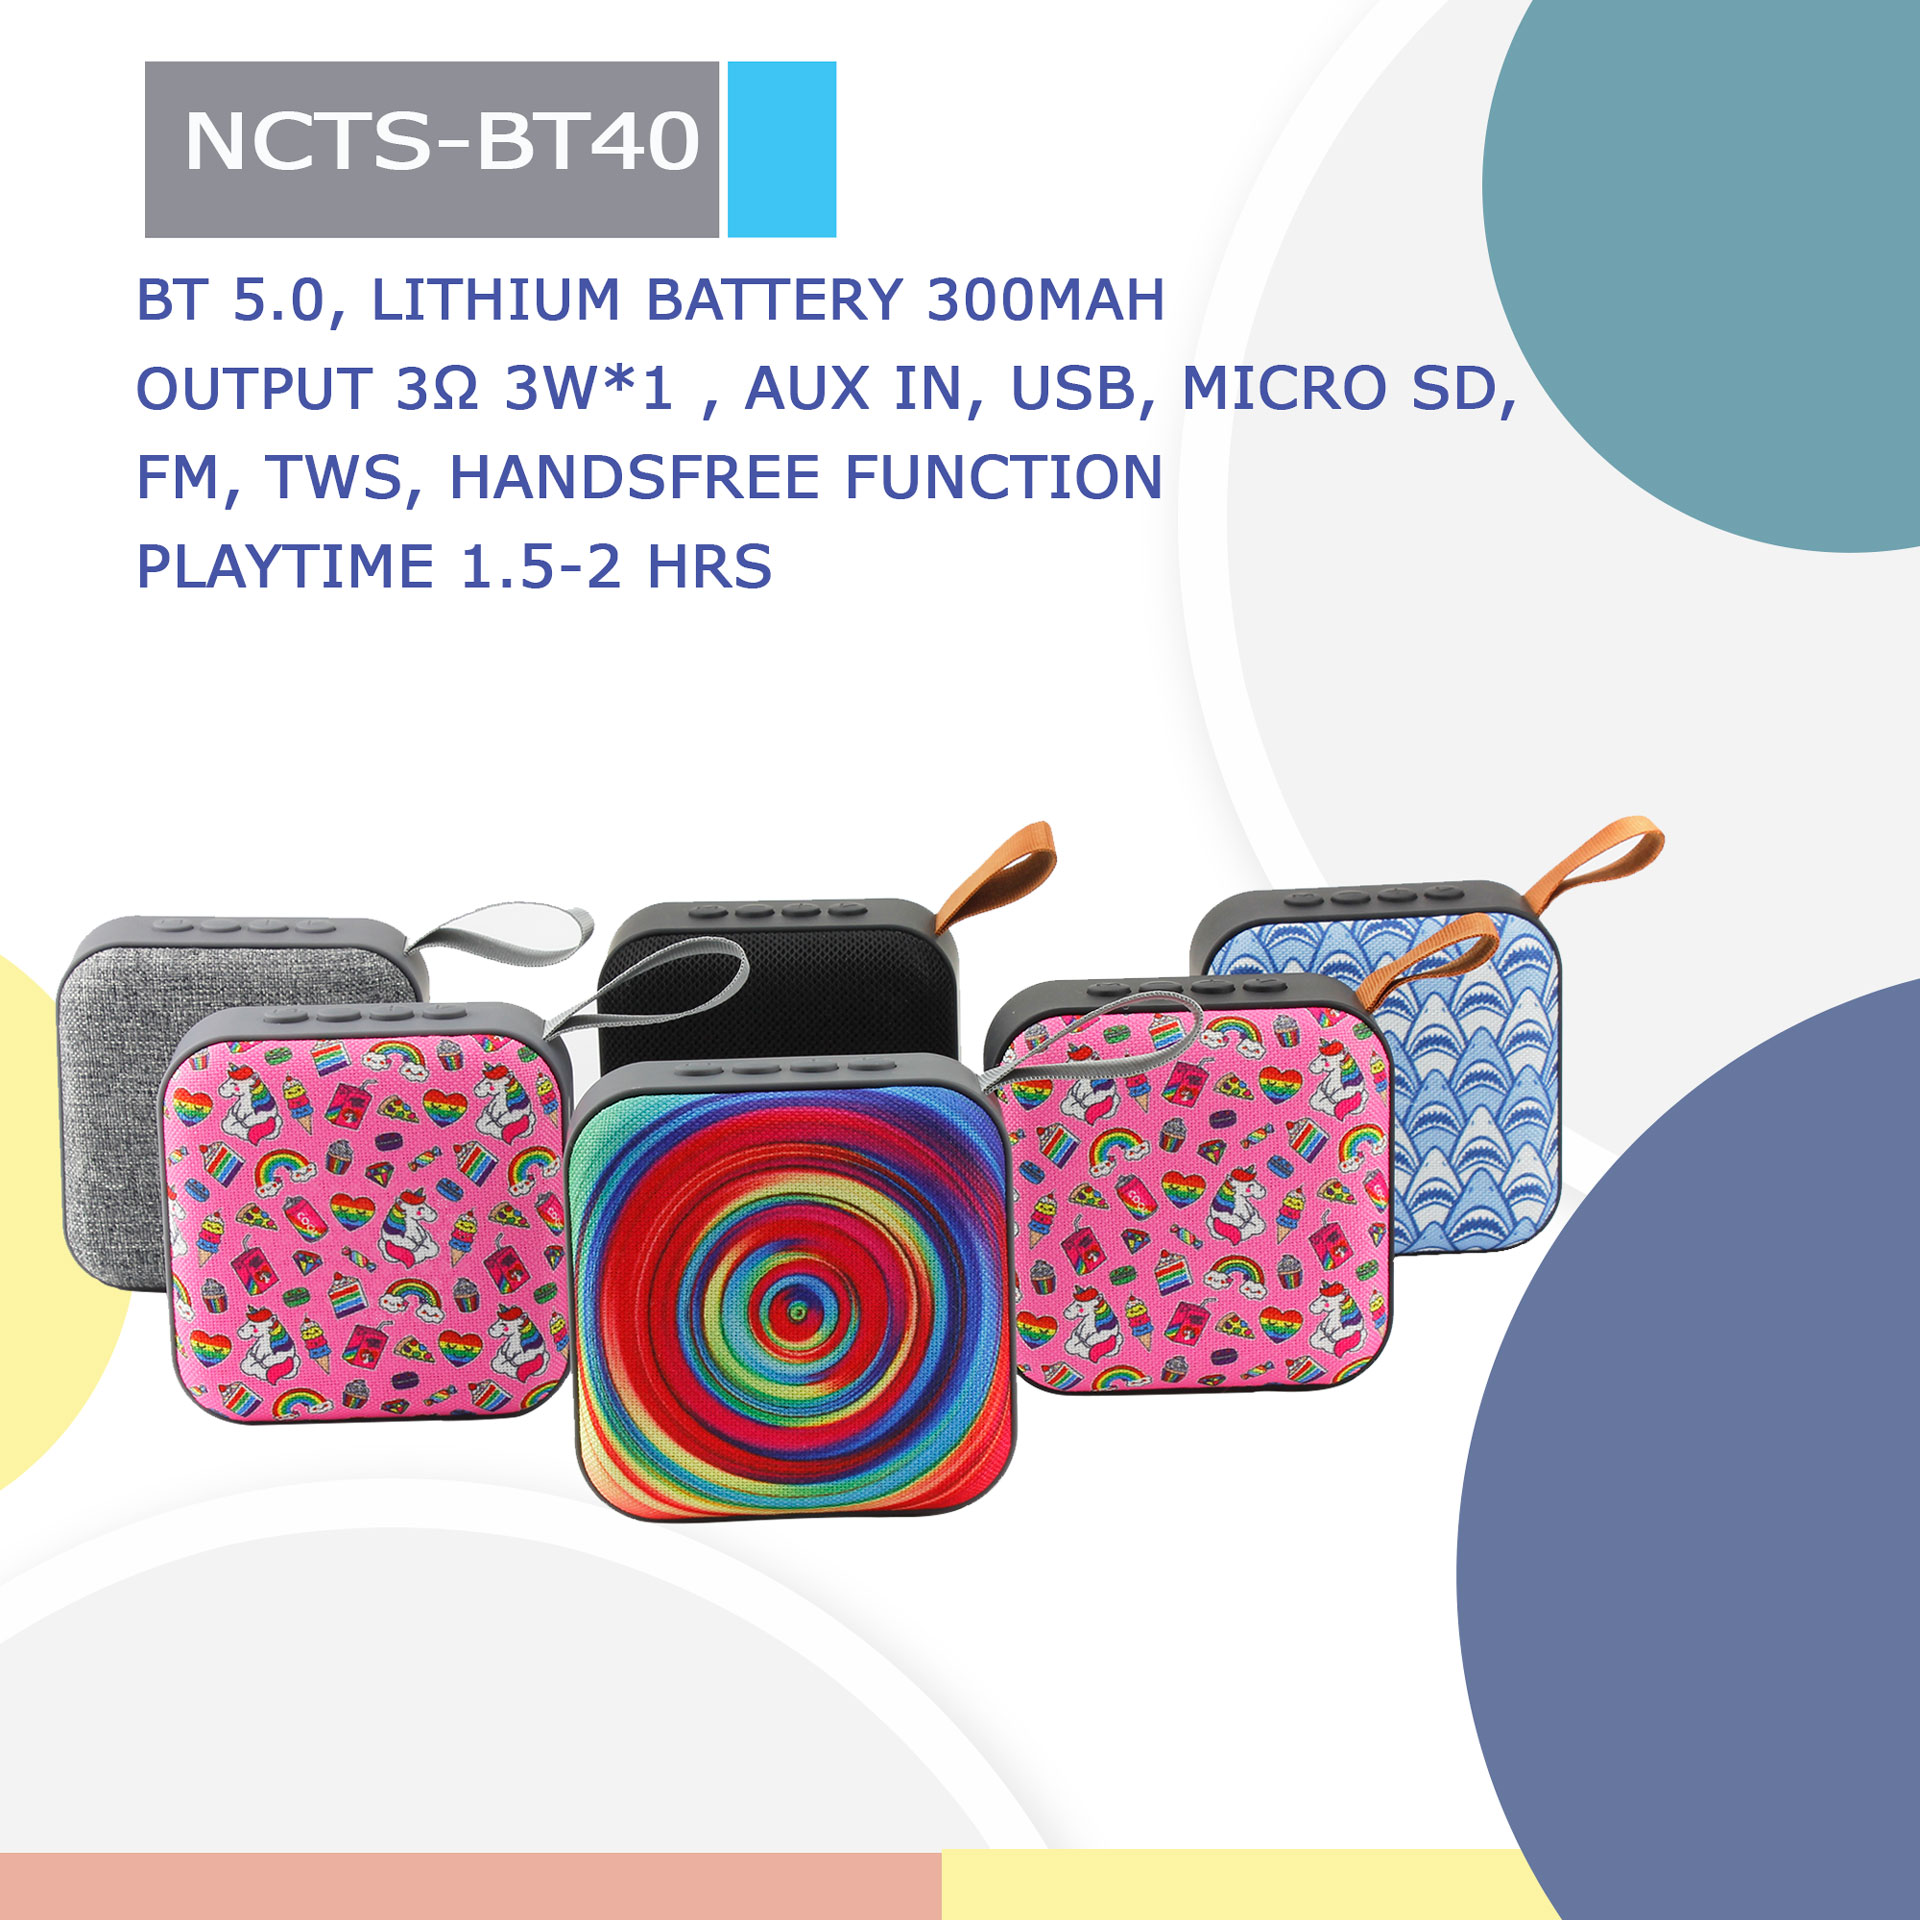 NCTS-BT40